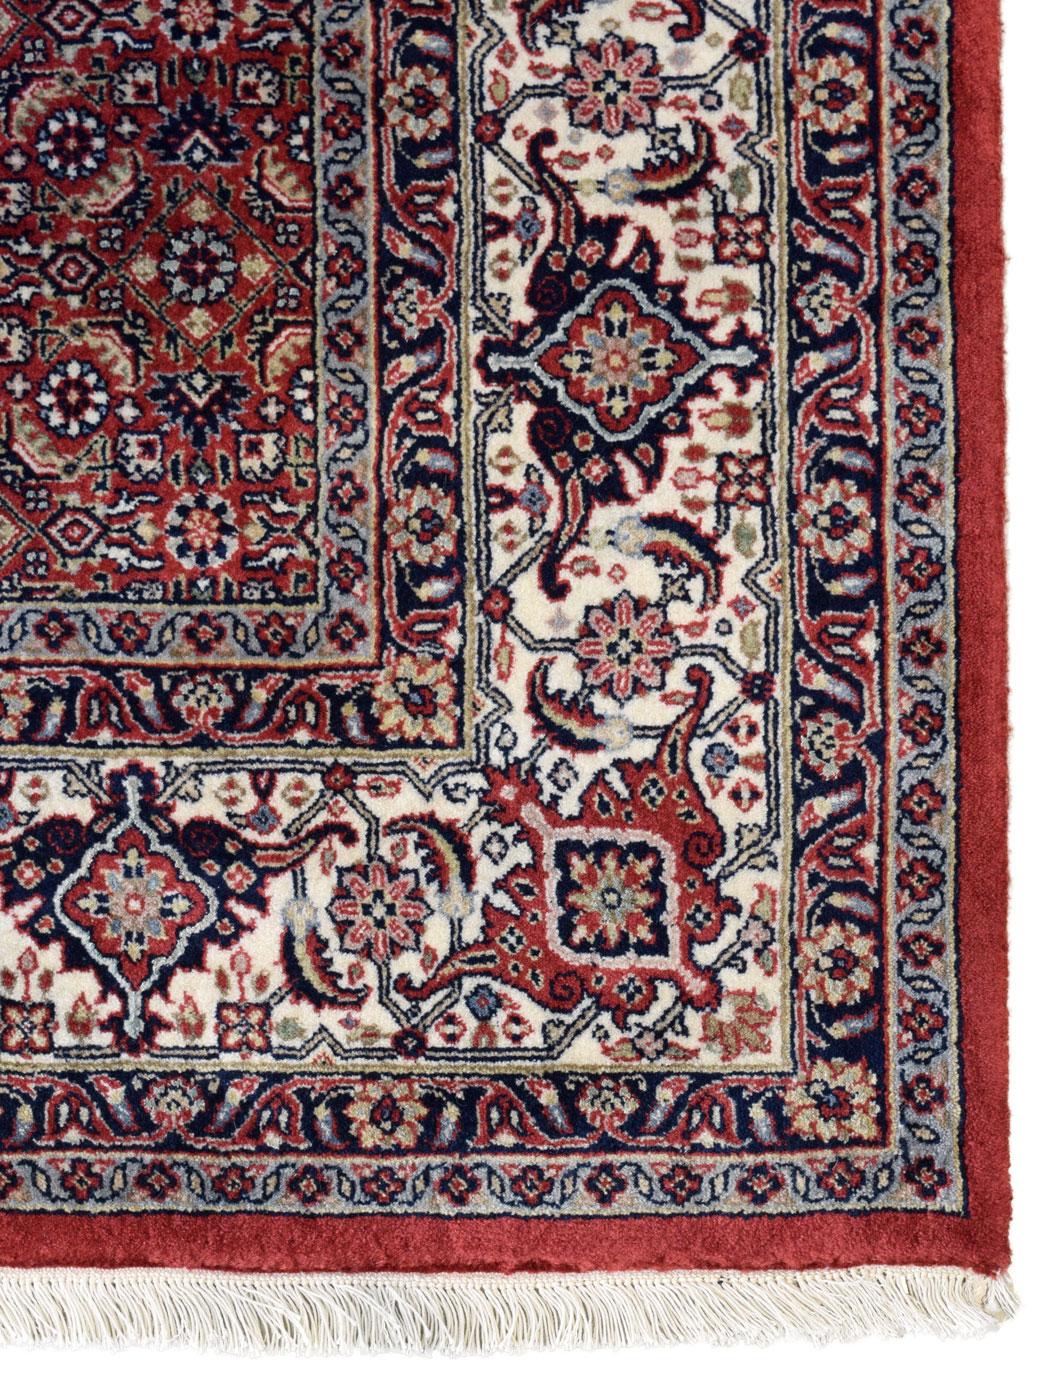 Tribal Classic Hand-Knotted Bidjar Carpet in Red, Indigo, and Cream Wool, 5' x 7' For Sale